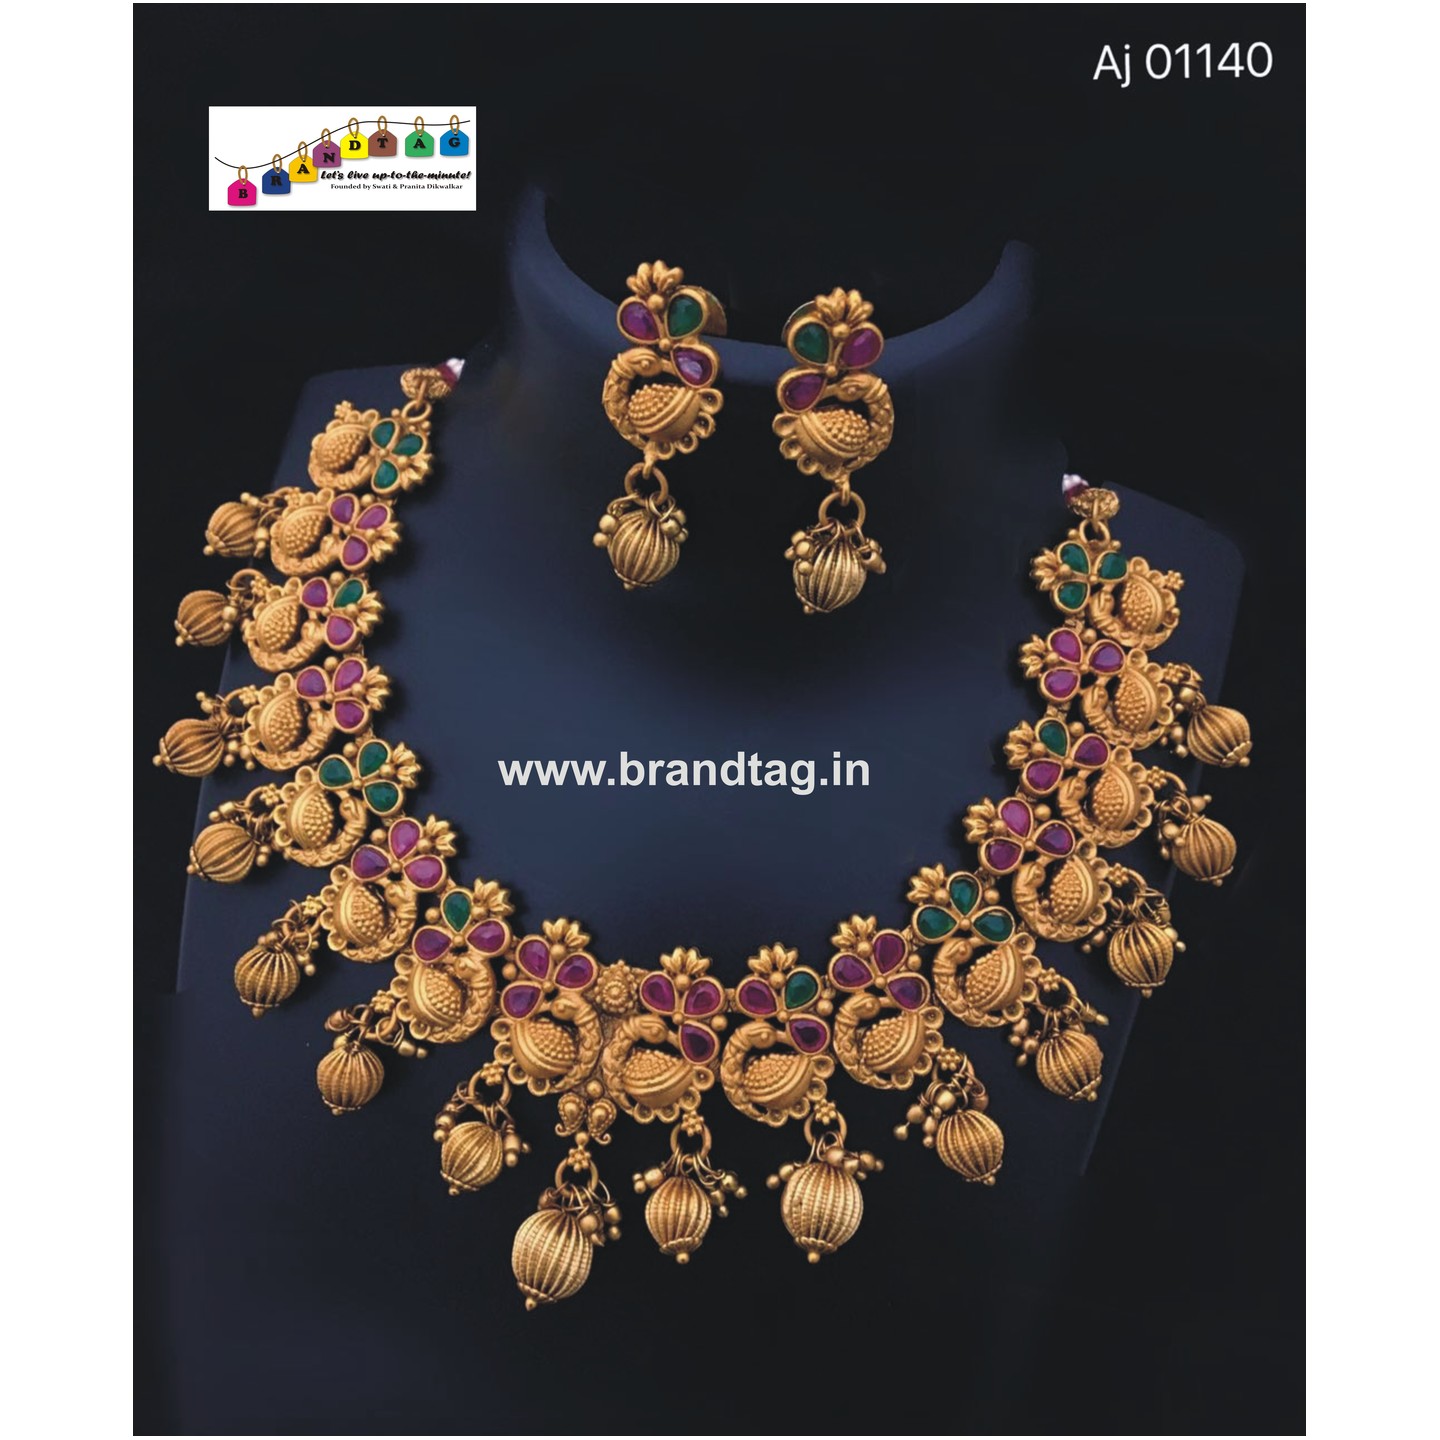 Special Ganesh Festival Collection .Golden Peacock Matt Finished  Neck-fitted Necklace set !